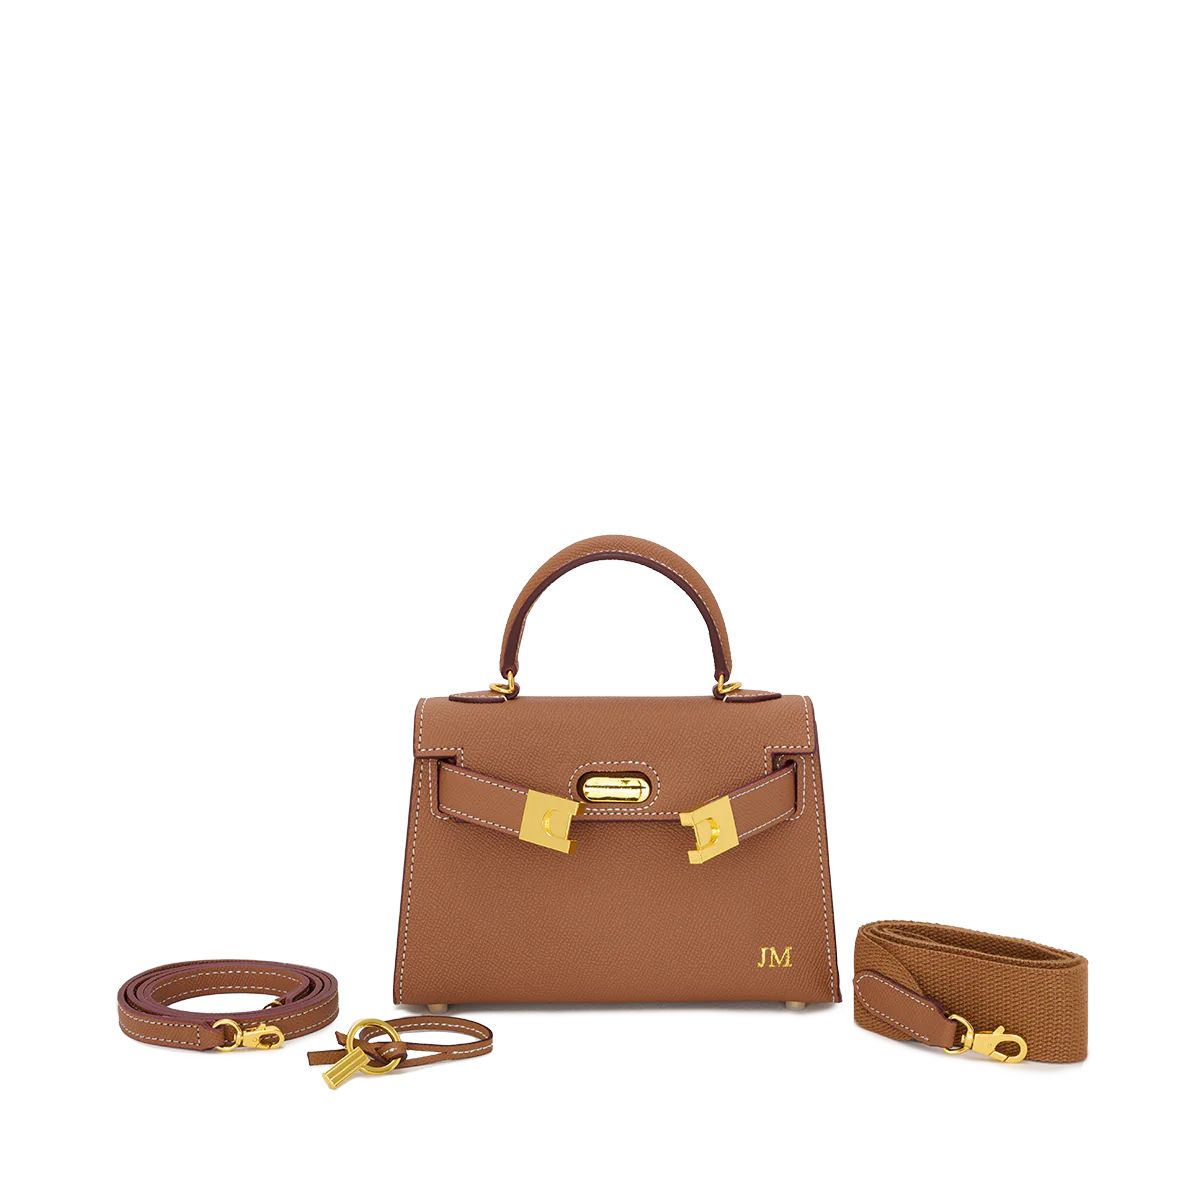 Lily and Bean Evie Leather Bag Tan | Lily and Bean